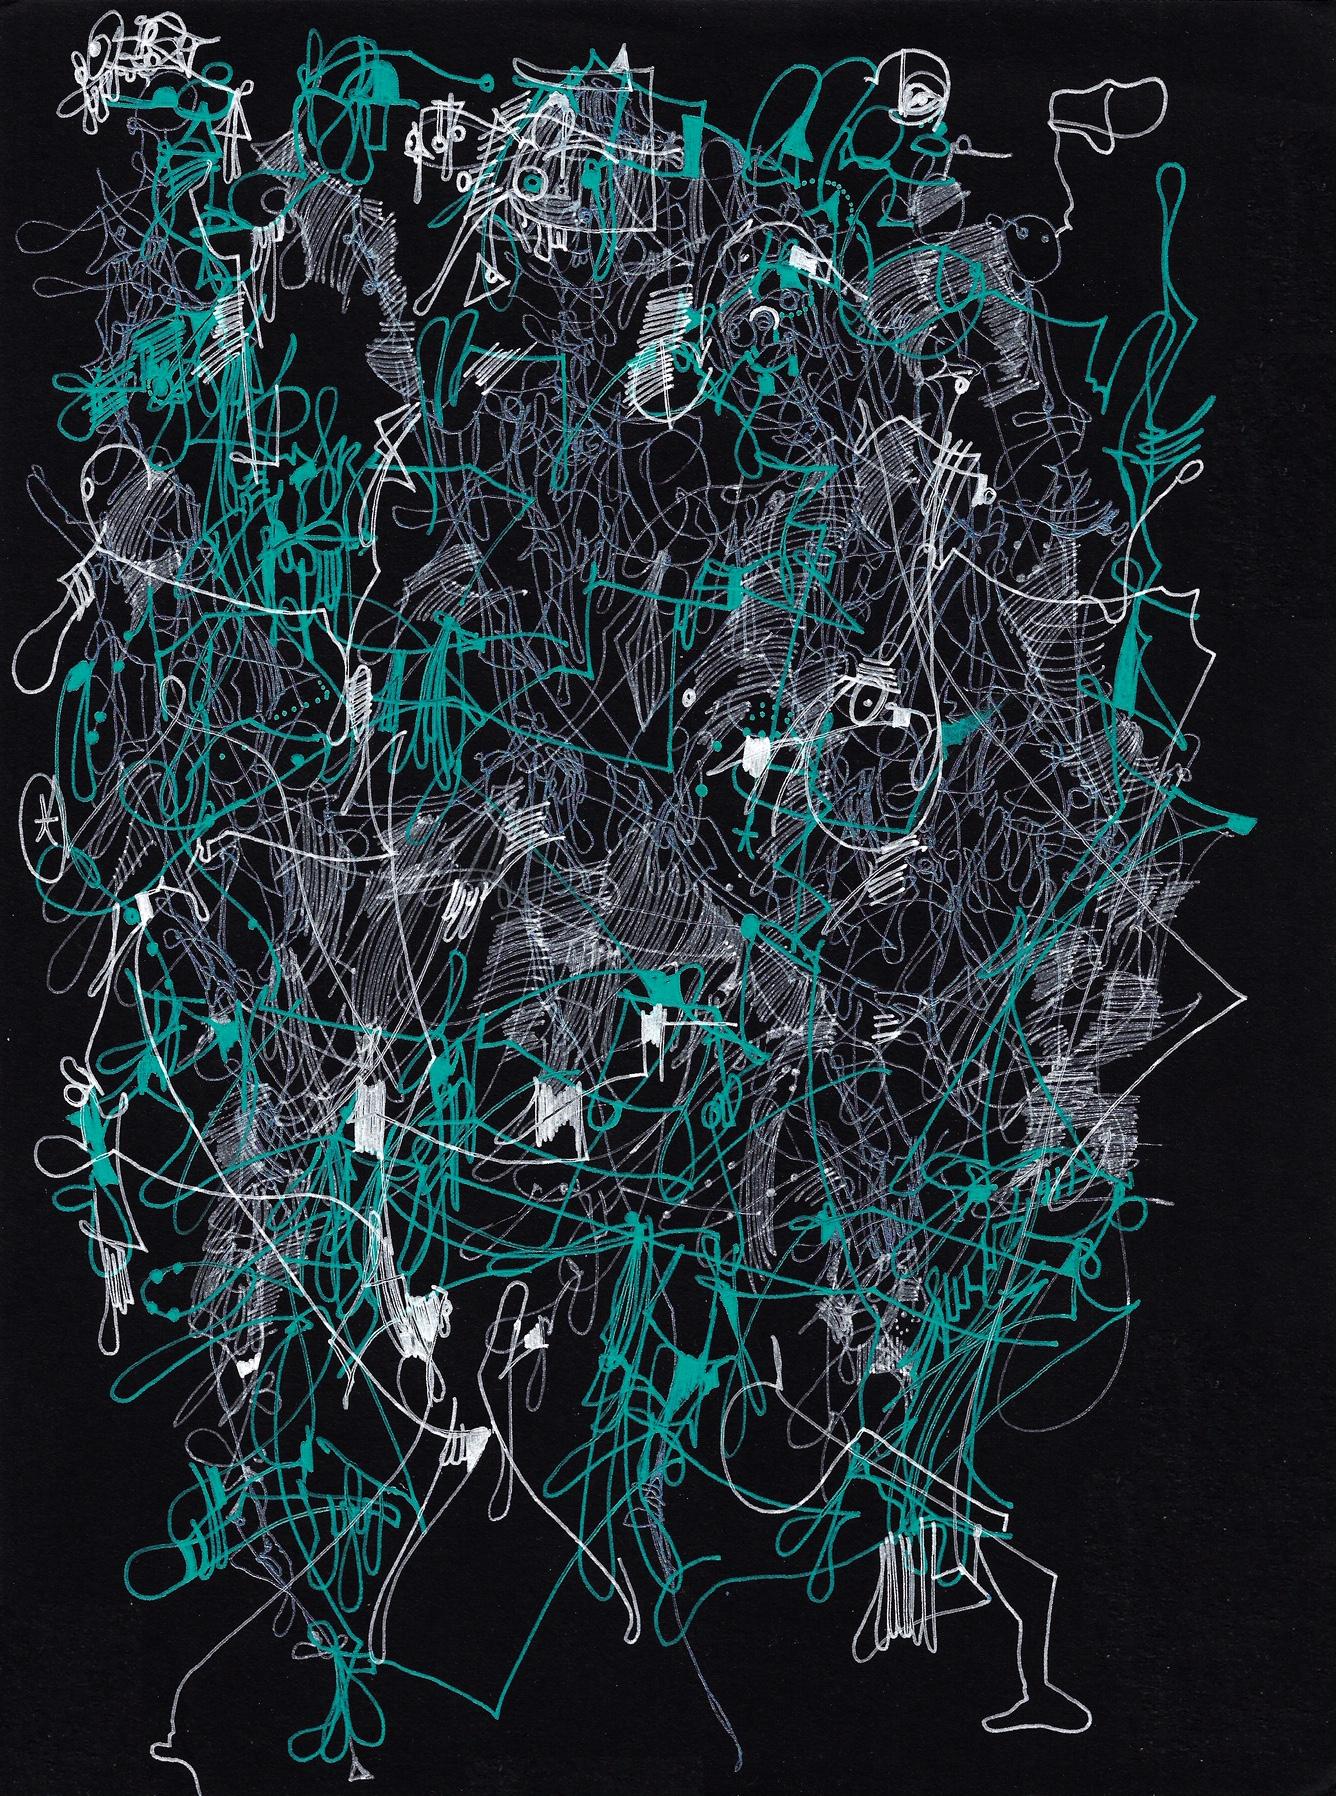 White and teal Ink on black paper

Michael Alan is an American artist born in 1977 who lives & works in New York, USA. As a multidisciplinary artist. His work has been featured in many solo shows, over 200 group shows, and over 200 Living